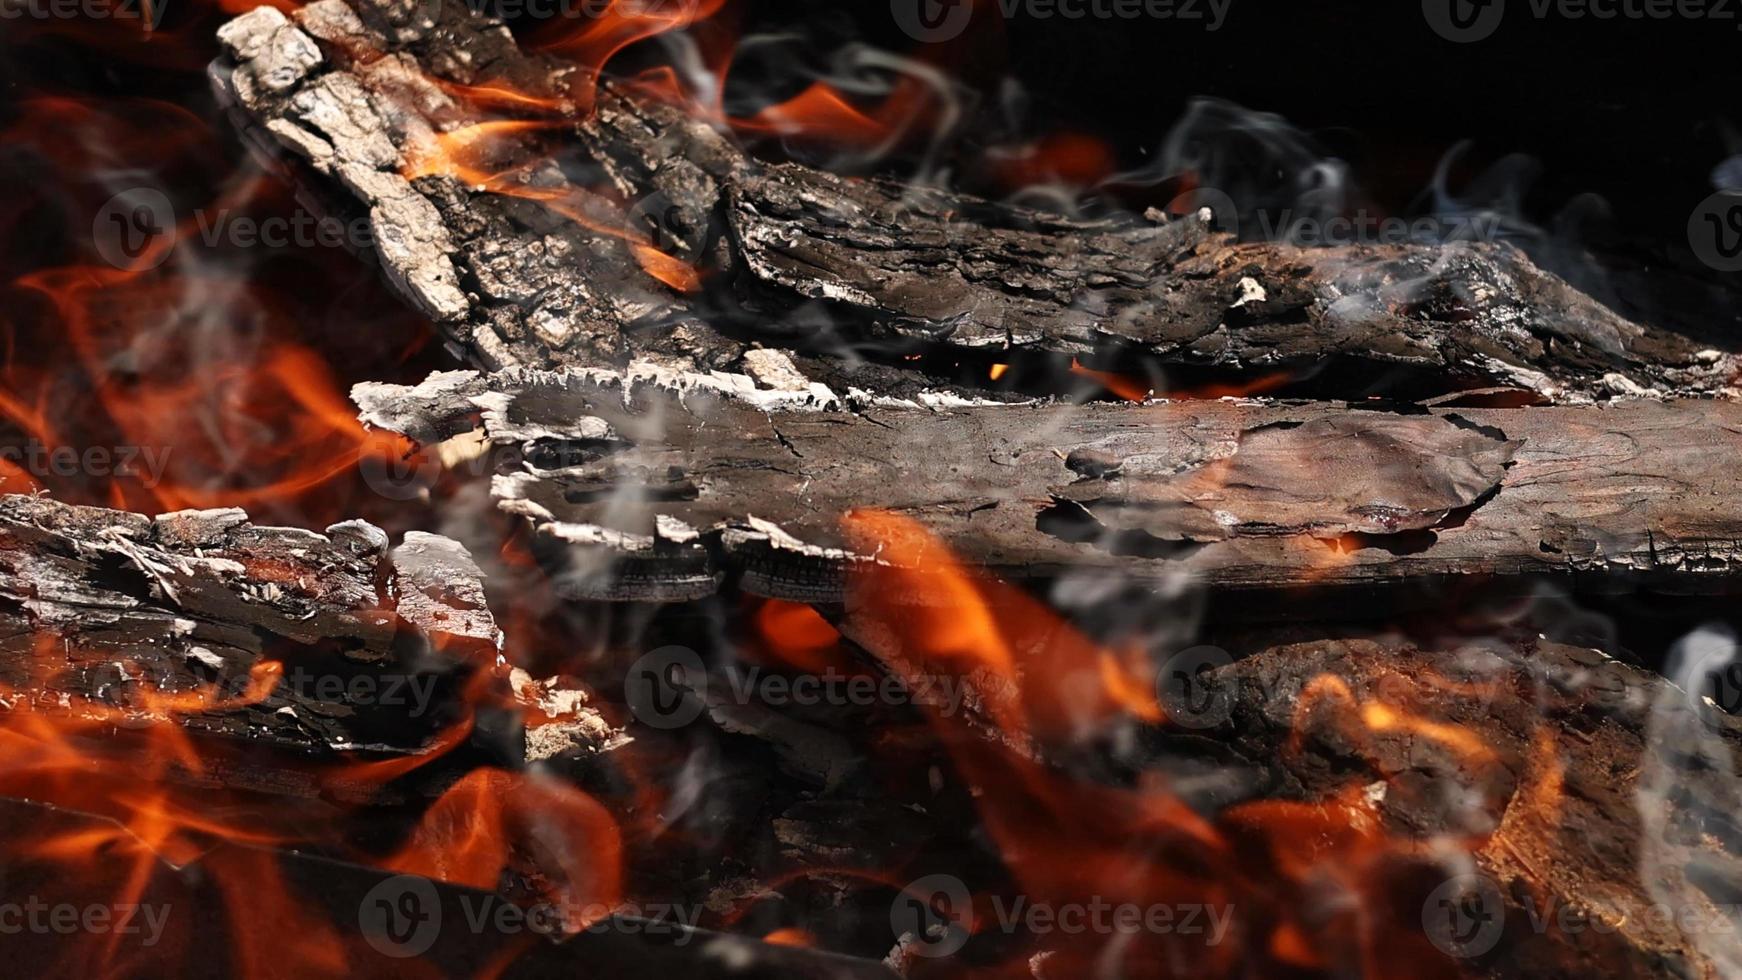 burning firewood up close. barbecue woods, flame fire, ash coals burning outdoors. smoke going up from burning wood logs, campfire orange flames. photo